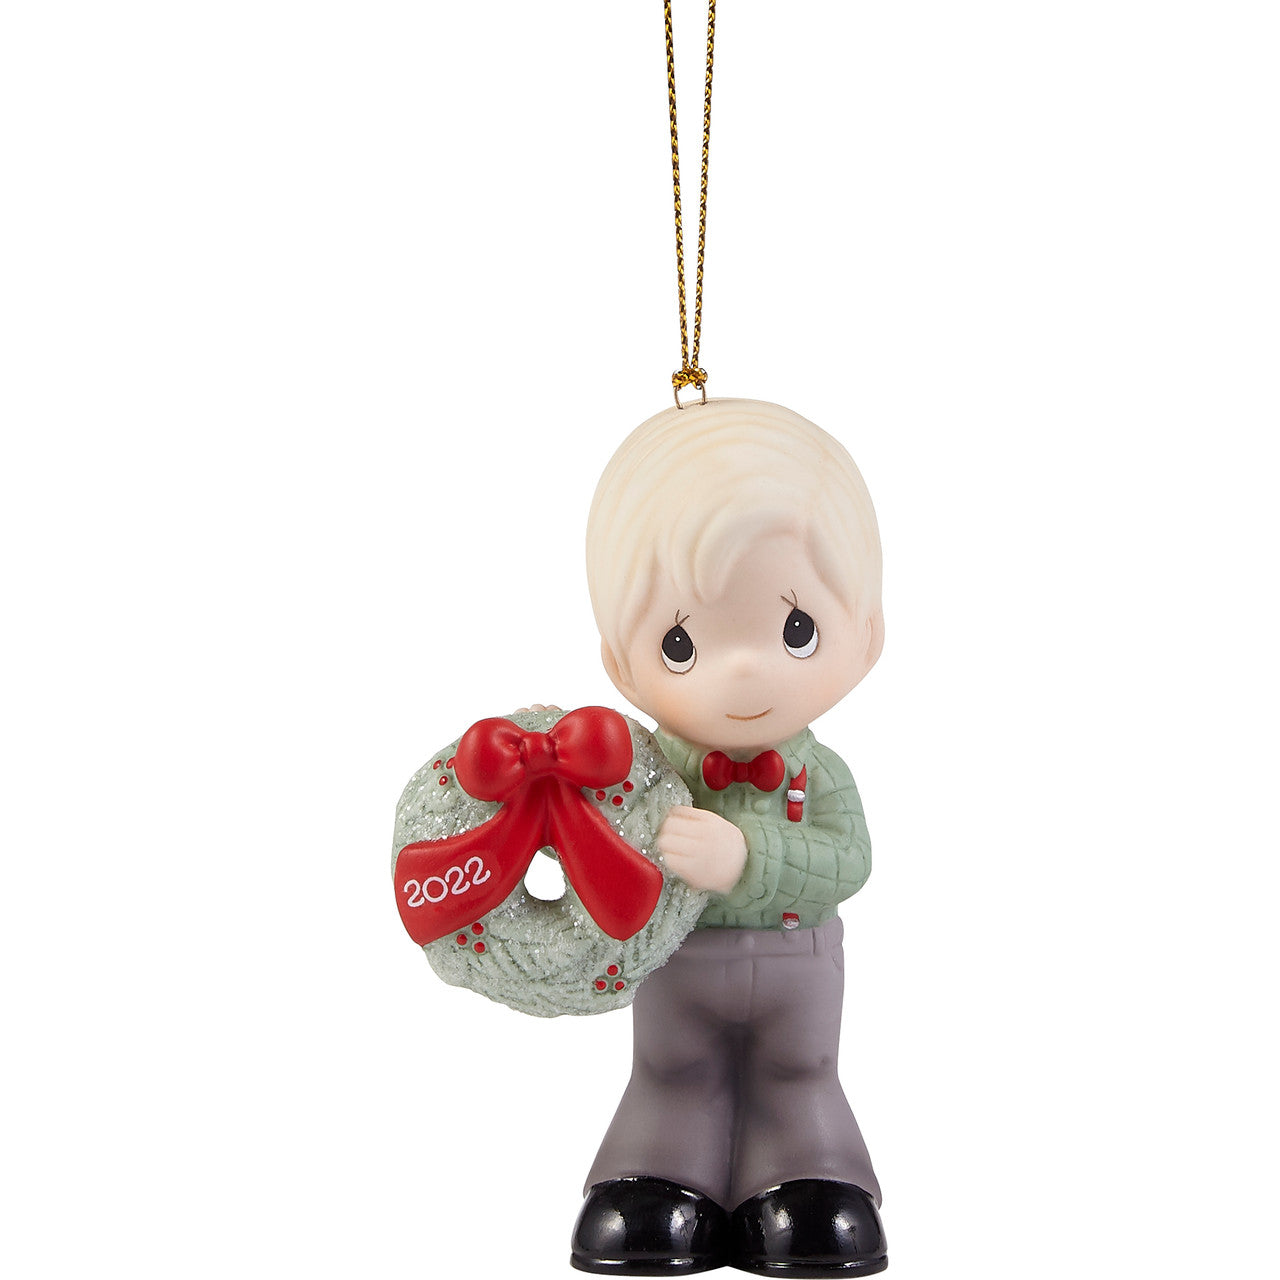 Precious Moments 2022 Boy ornament "May Your Christmas Wishes Come True" - Royal Gift